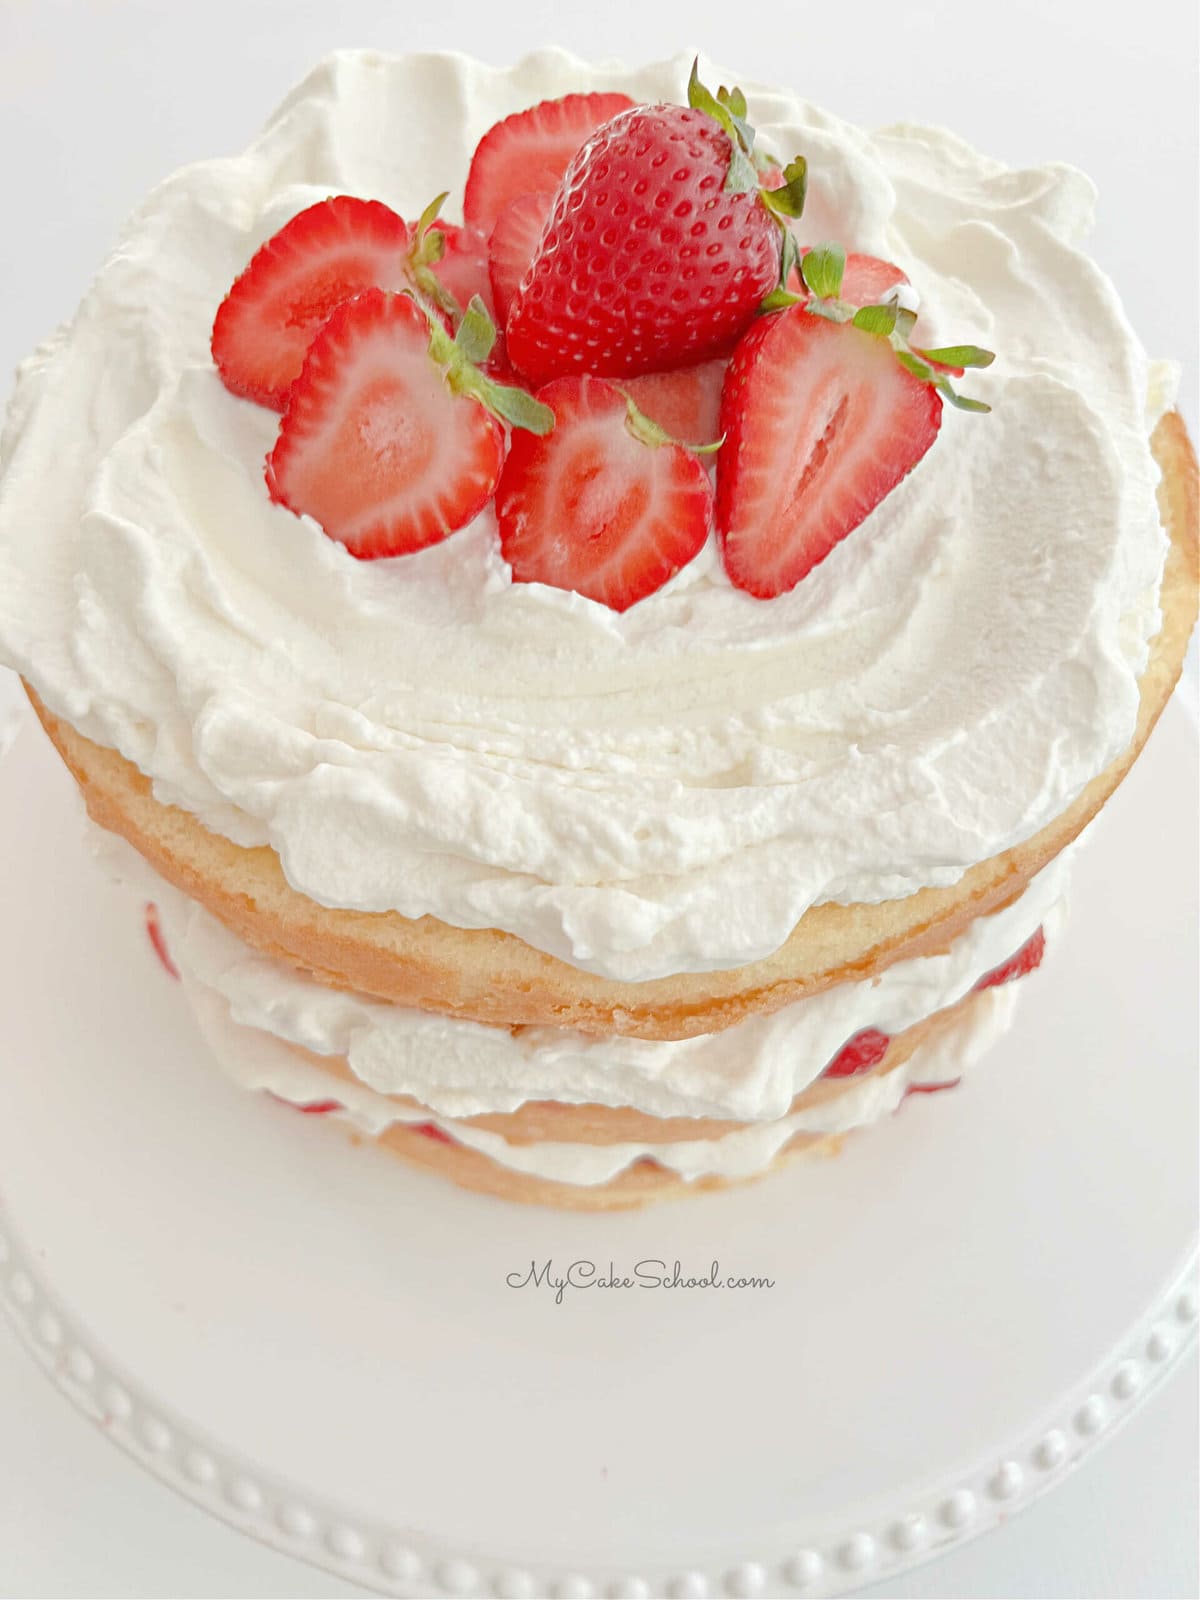 Top view of strawberry shortcake, topped with fresh strawberries